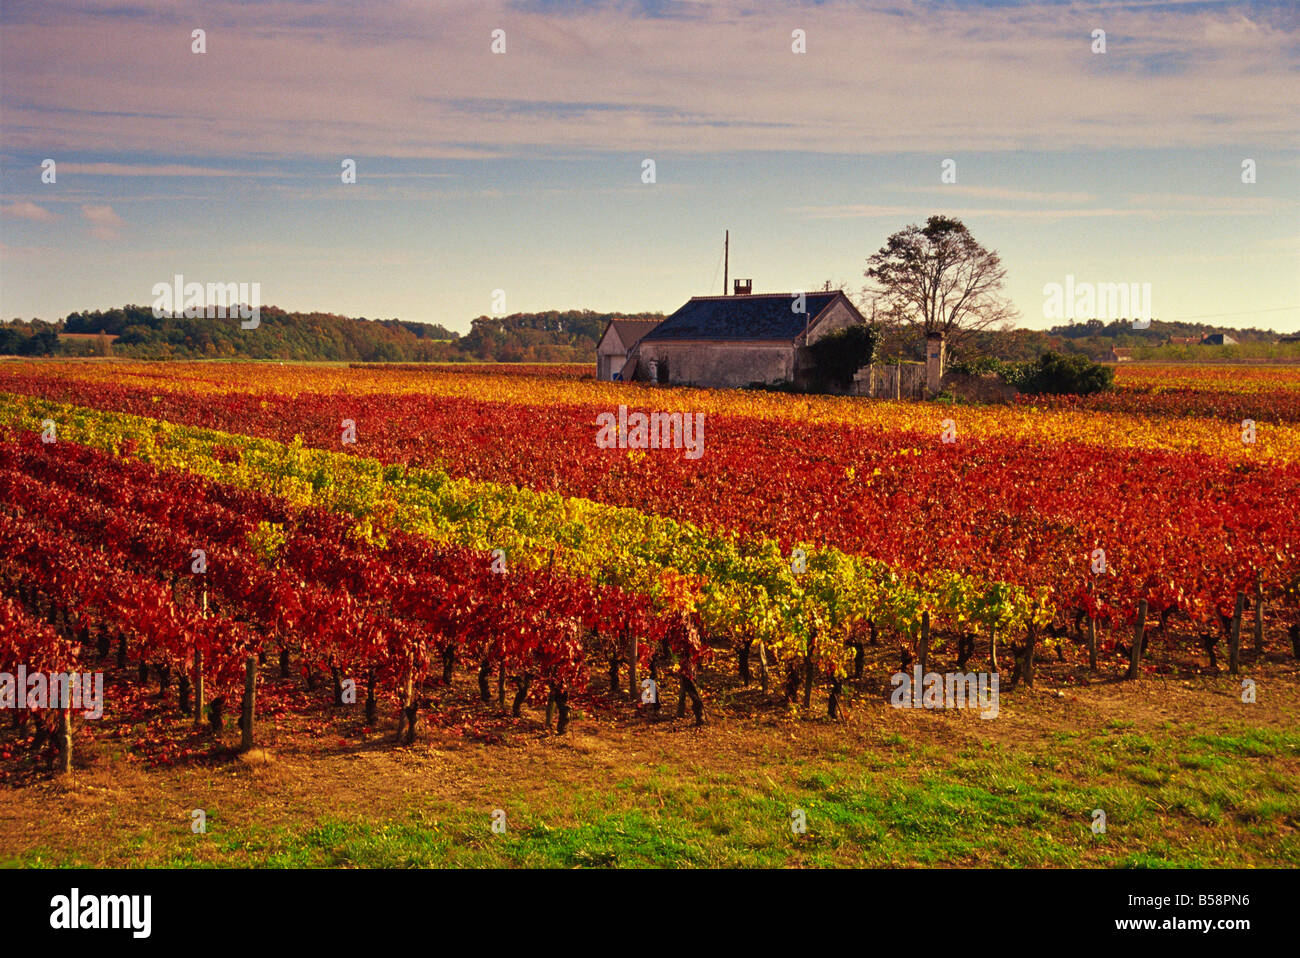 Vineyards near Loches Indre et Loire Touraine Loire Valley France Europe Stock Photo